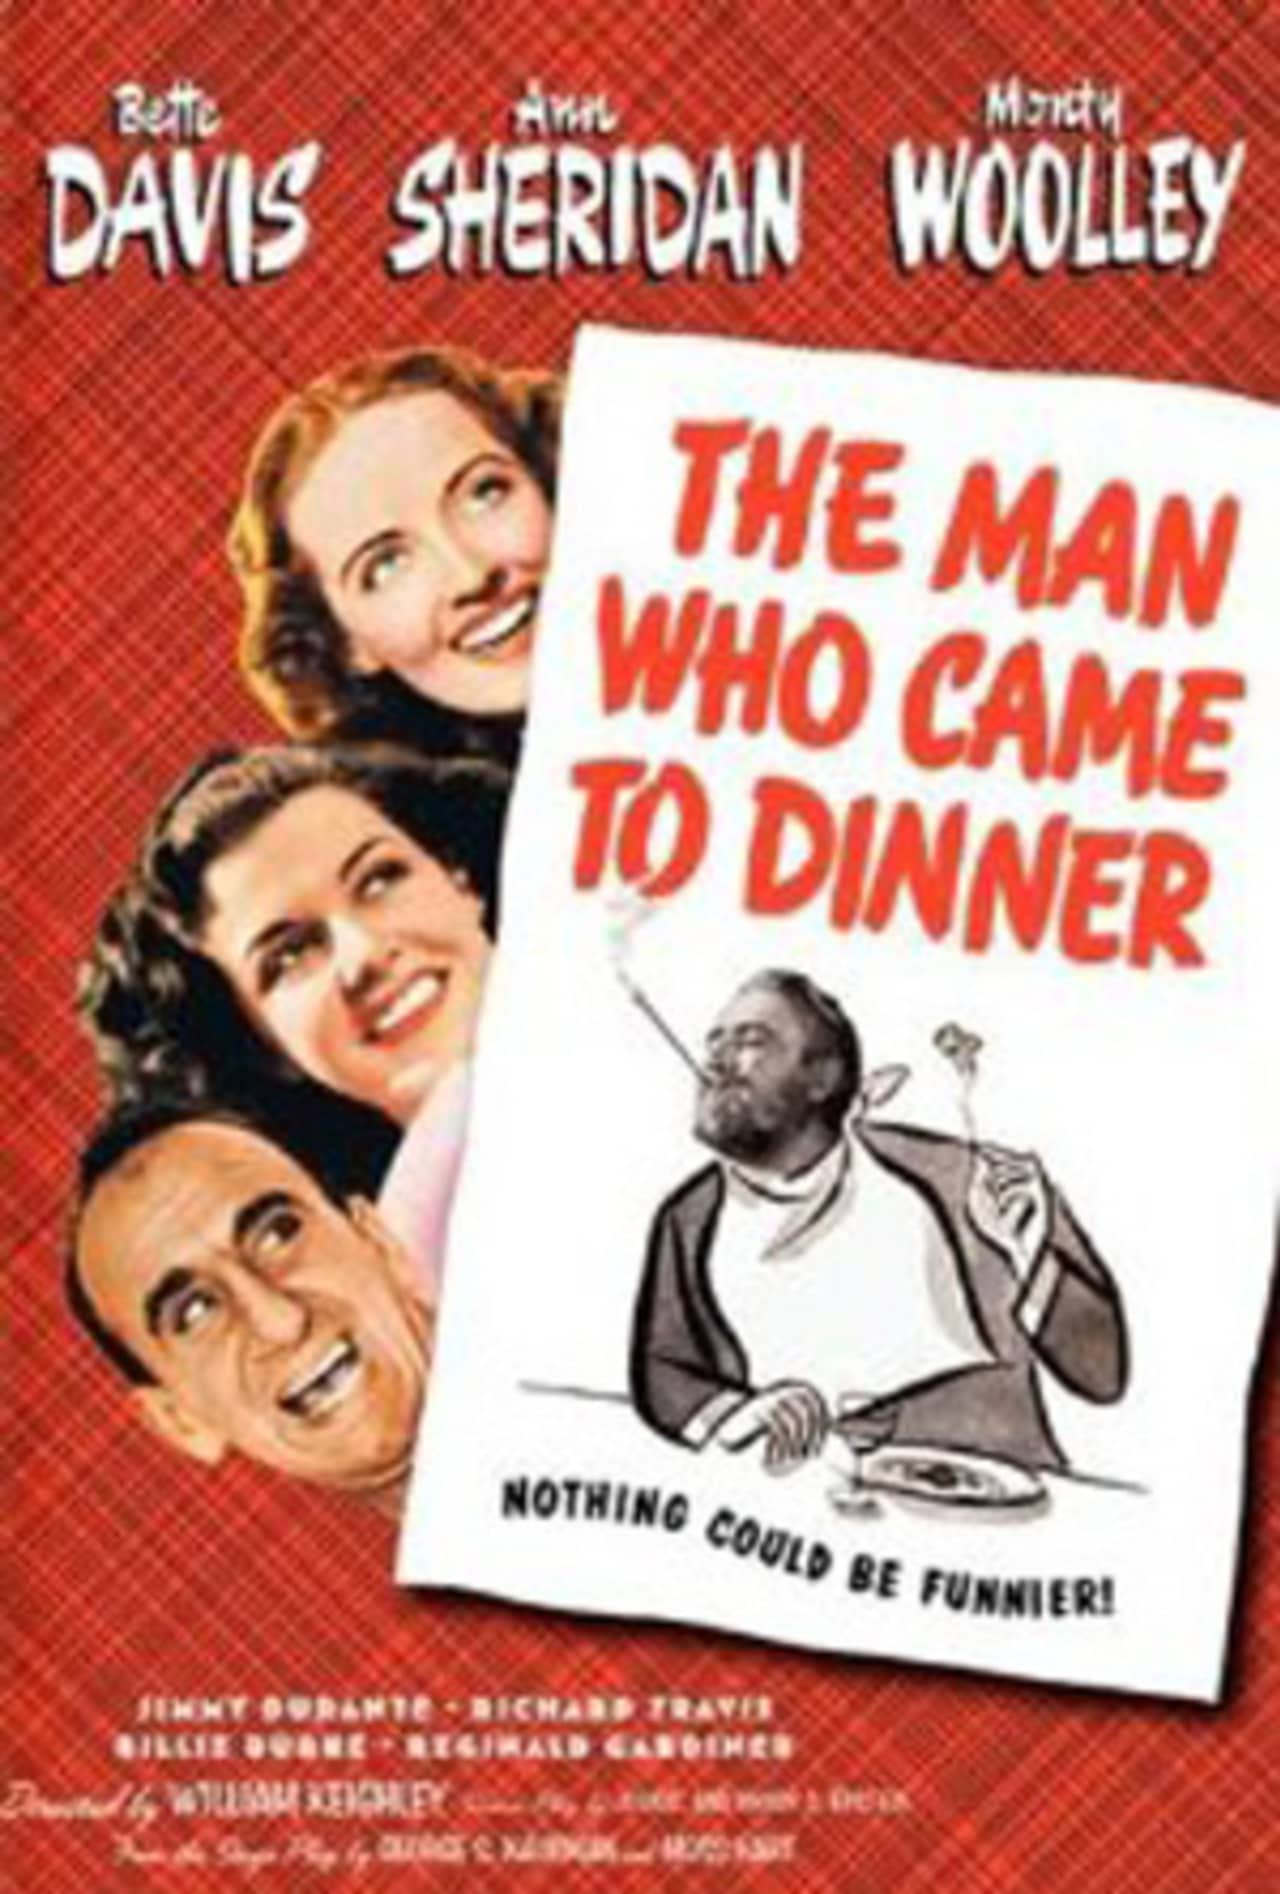 Auditions for "The Man Who Came to Dinner" are taking place at the Antrim Playhouse in Wesley Hills.